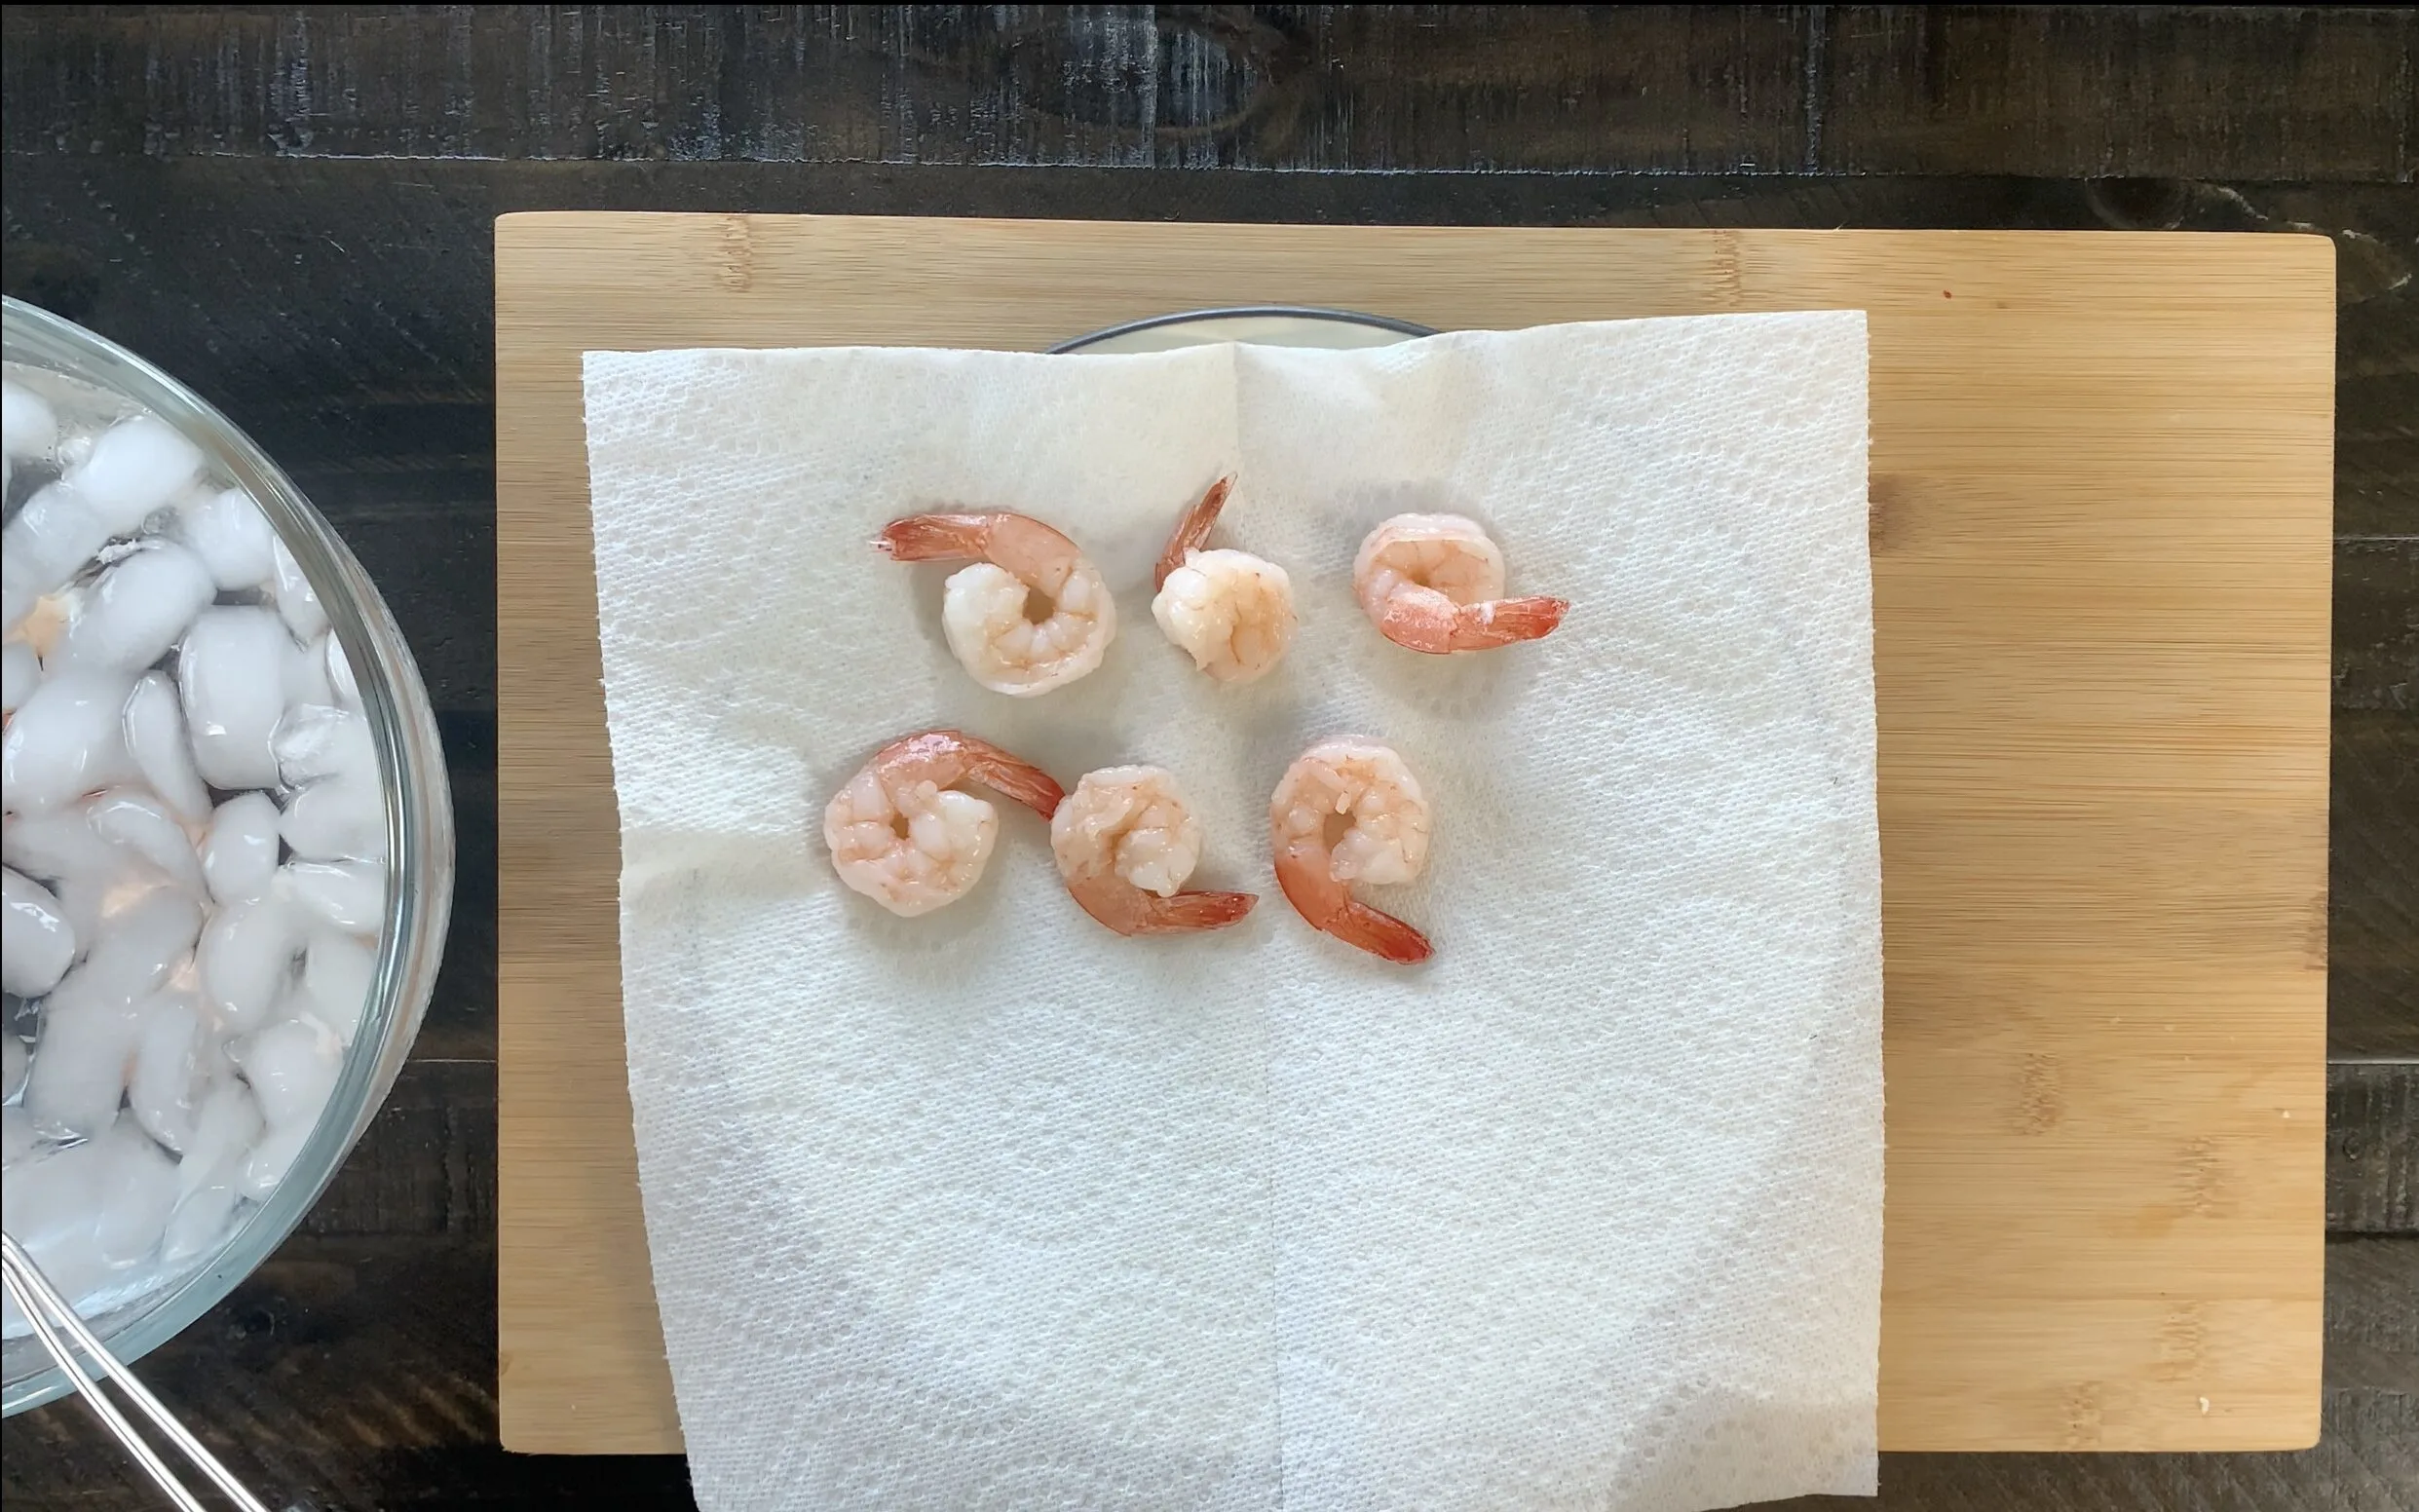 Removing shrimp from ice water